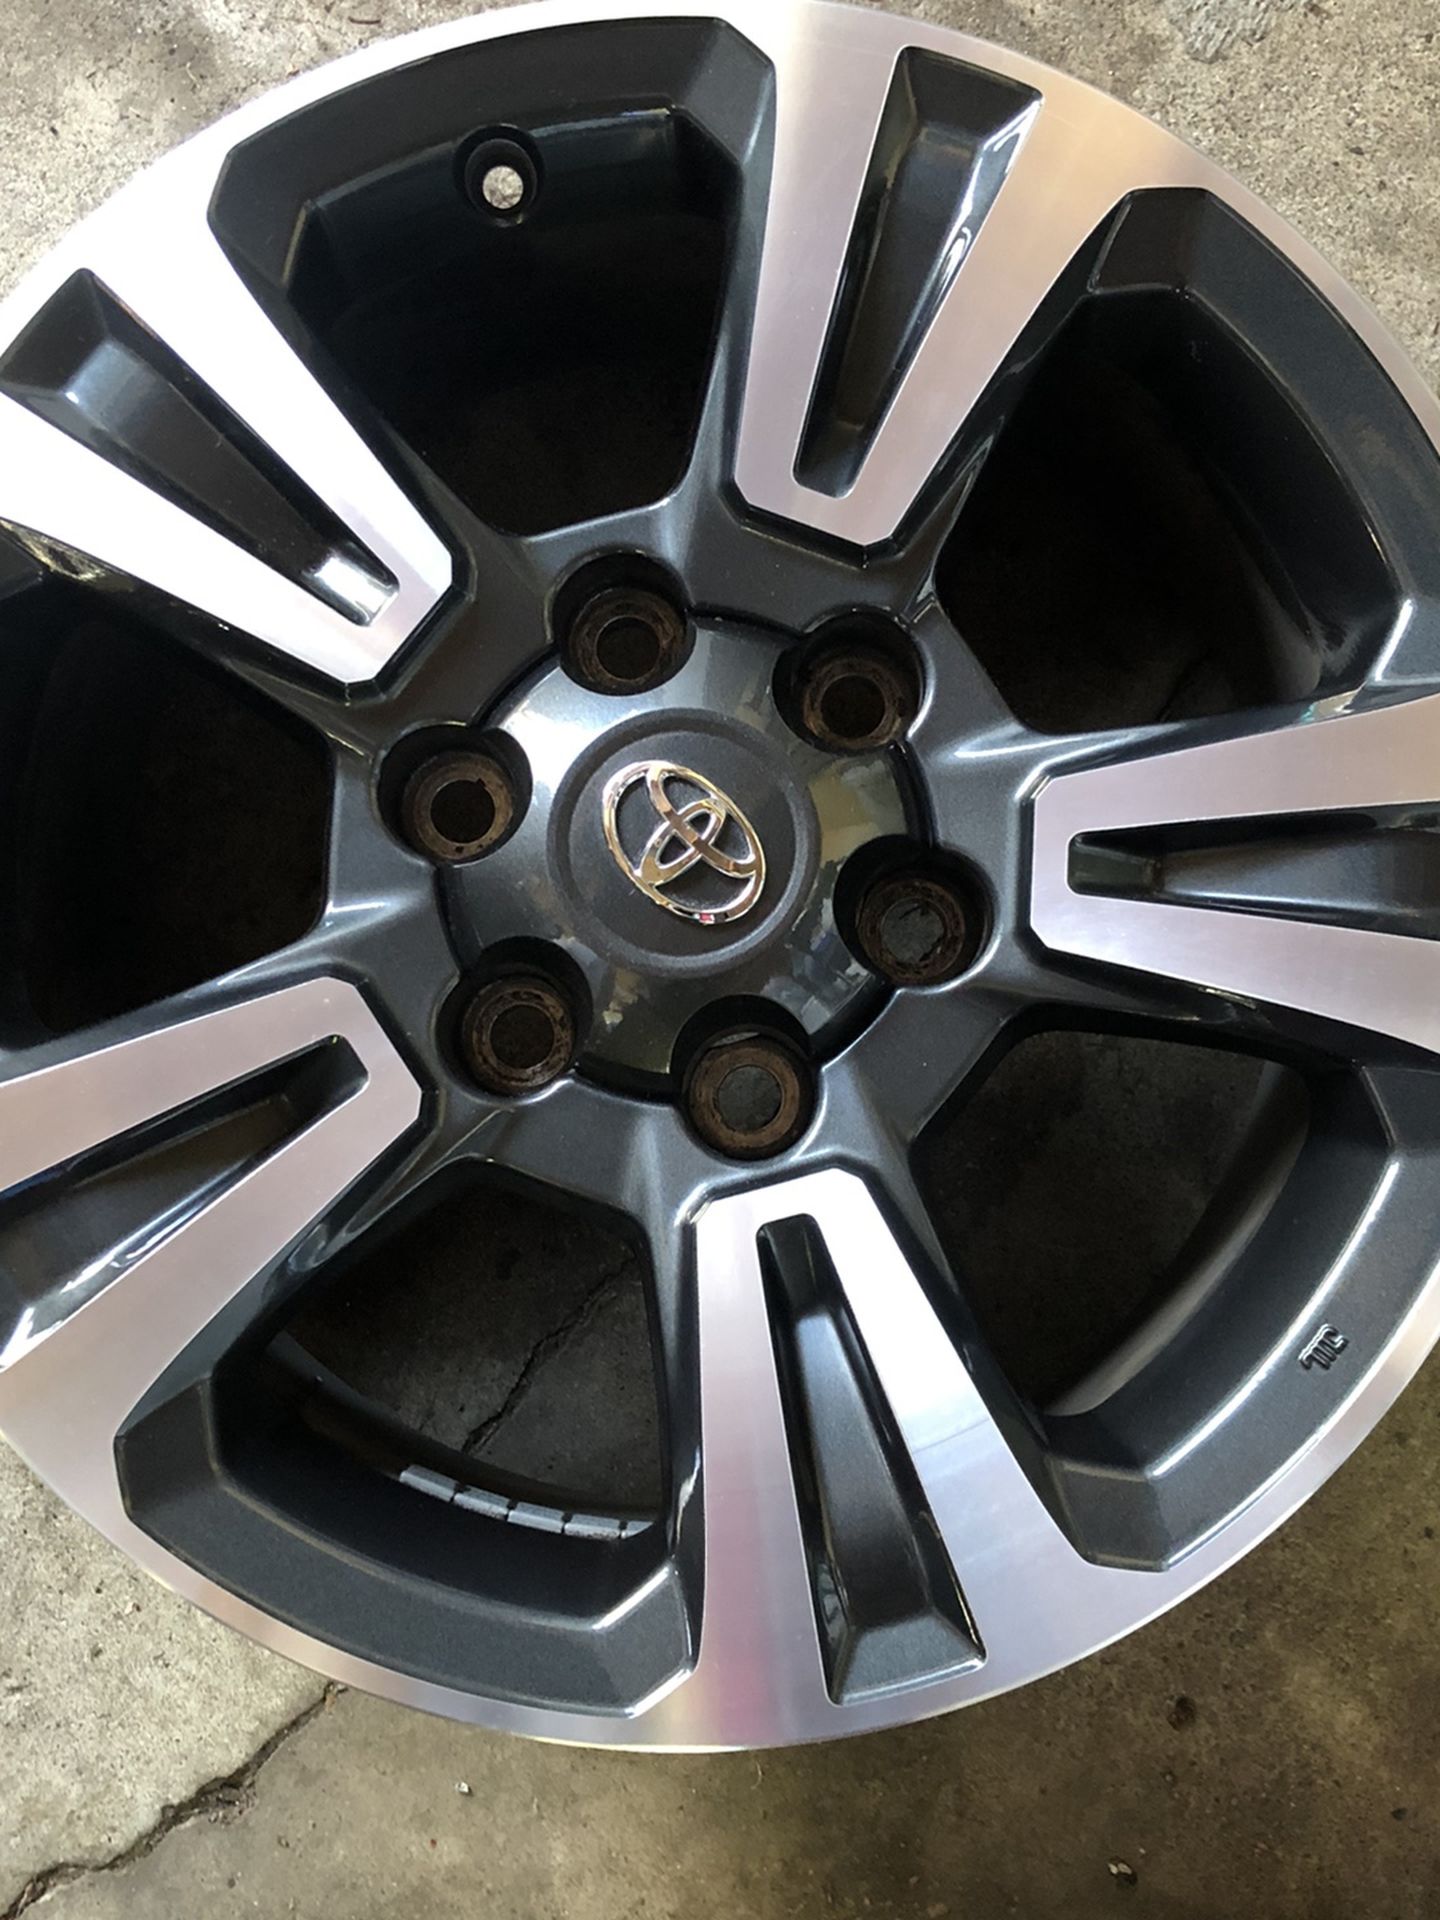 4 RIMS TOYOTA SIZE 17 TRD STOCK THEY FIT TACOMA SEQUOIA 4RUNNER 6 LUGS GREAT CONDITION AND GREAT SHAPE 